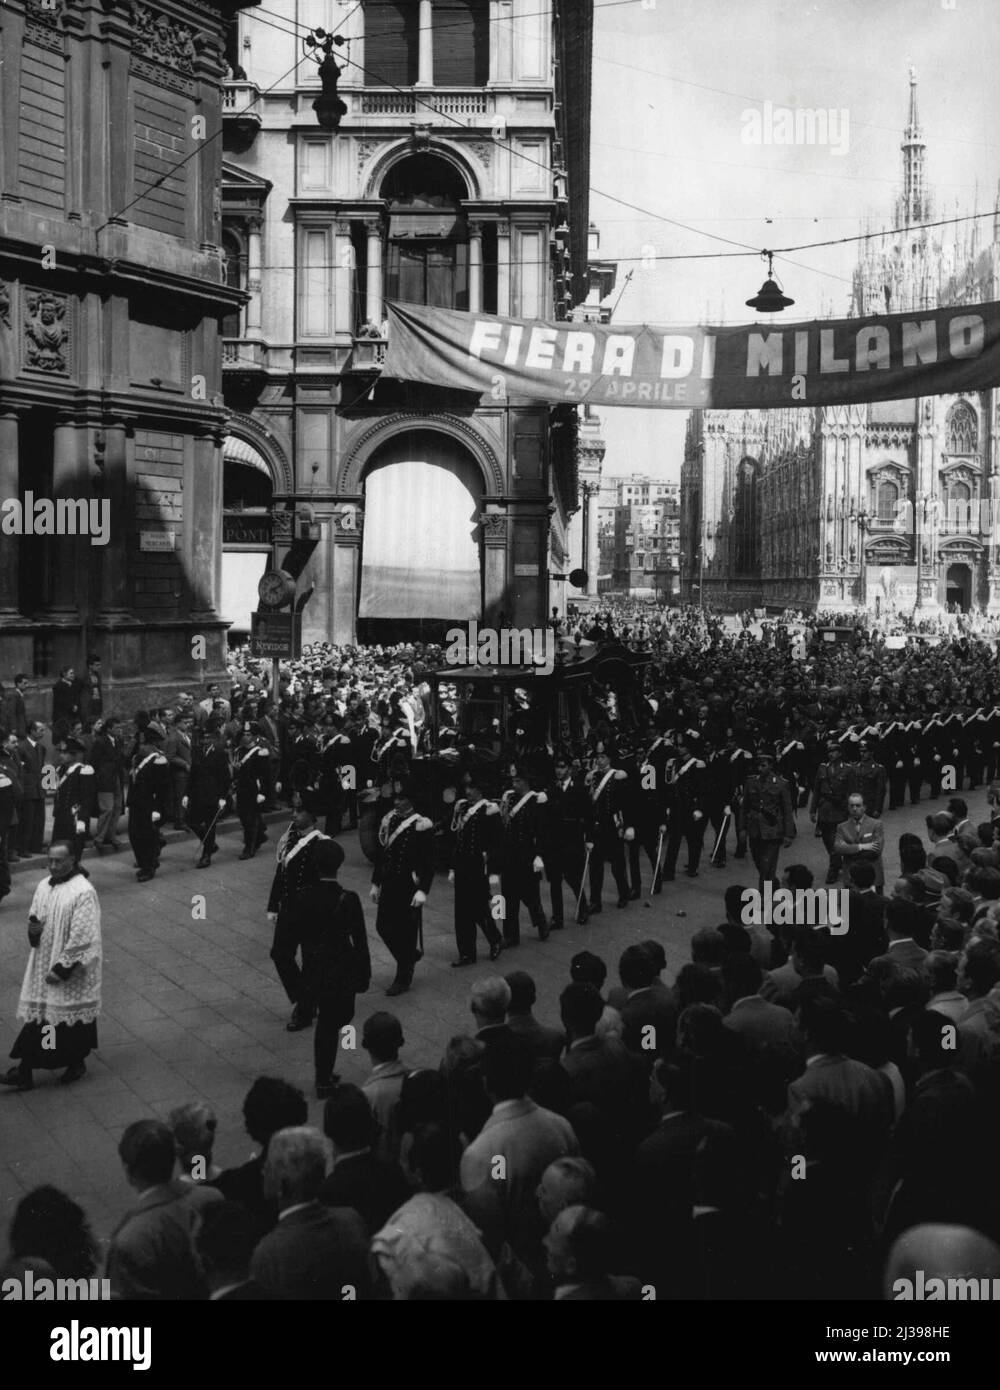 Funeral Procession For Milan Carabinier Killed During Riots -- With considerable Pomp, the funeral procession of 19-year-old Angelo Mariani, the Carabinier who was killed during the Milan riot of April 25, moves through the city, April 27. April 29, 1948. (Photo by Associated Press Photo). Stock Photo